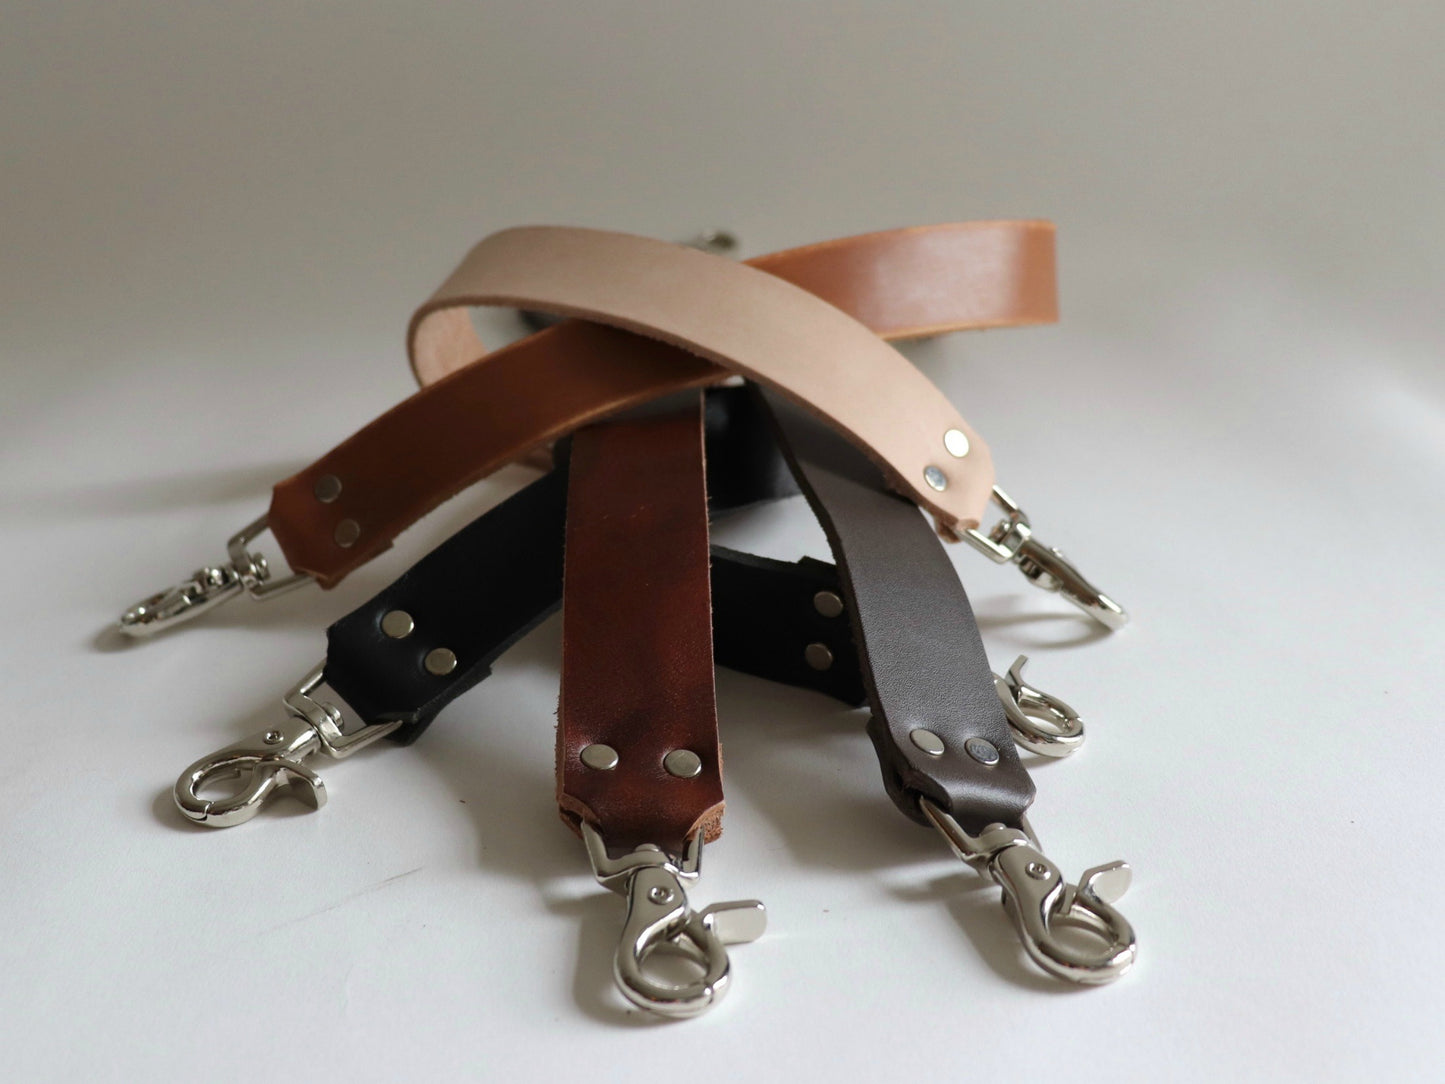 Leather Straps for Handbags and Crossbody Bags Standard 20 inch / Weathered Tan